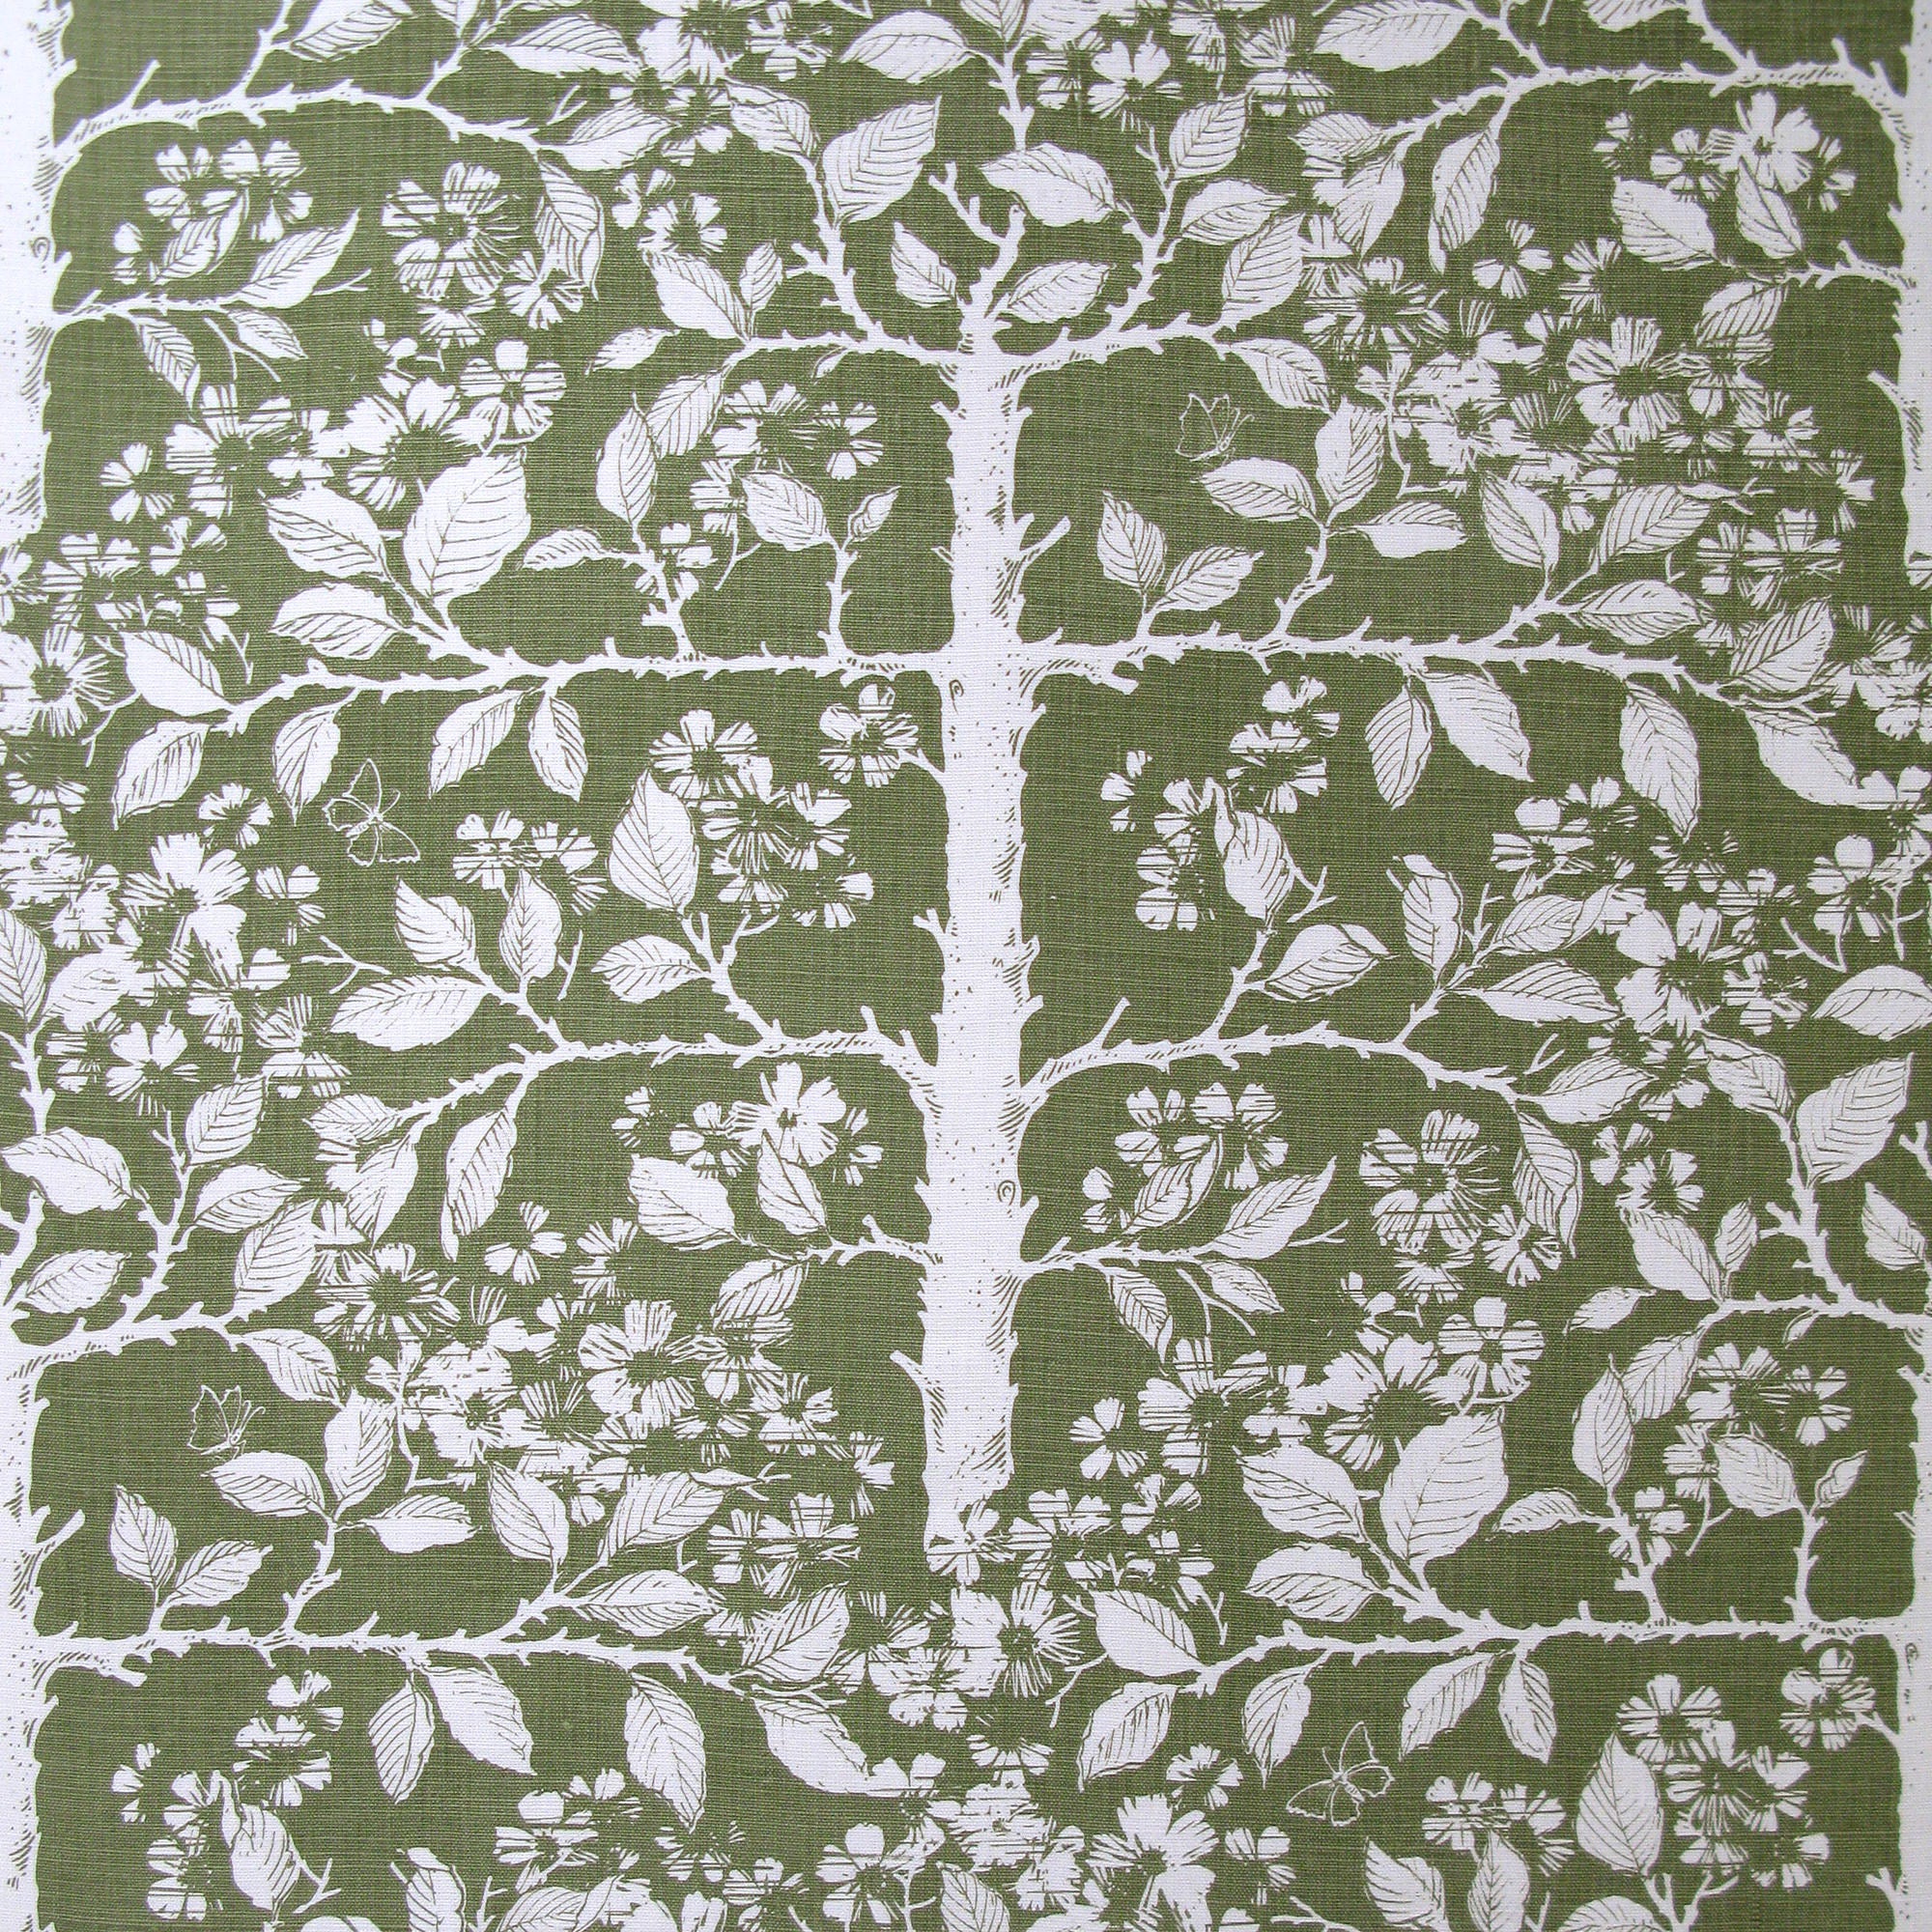 Detail of fabric in a large-scale tree and leaf print in white on a green field.